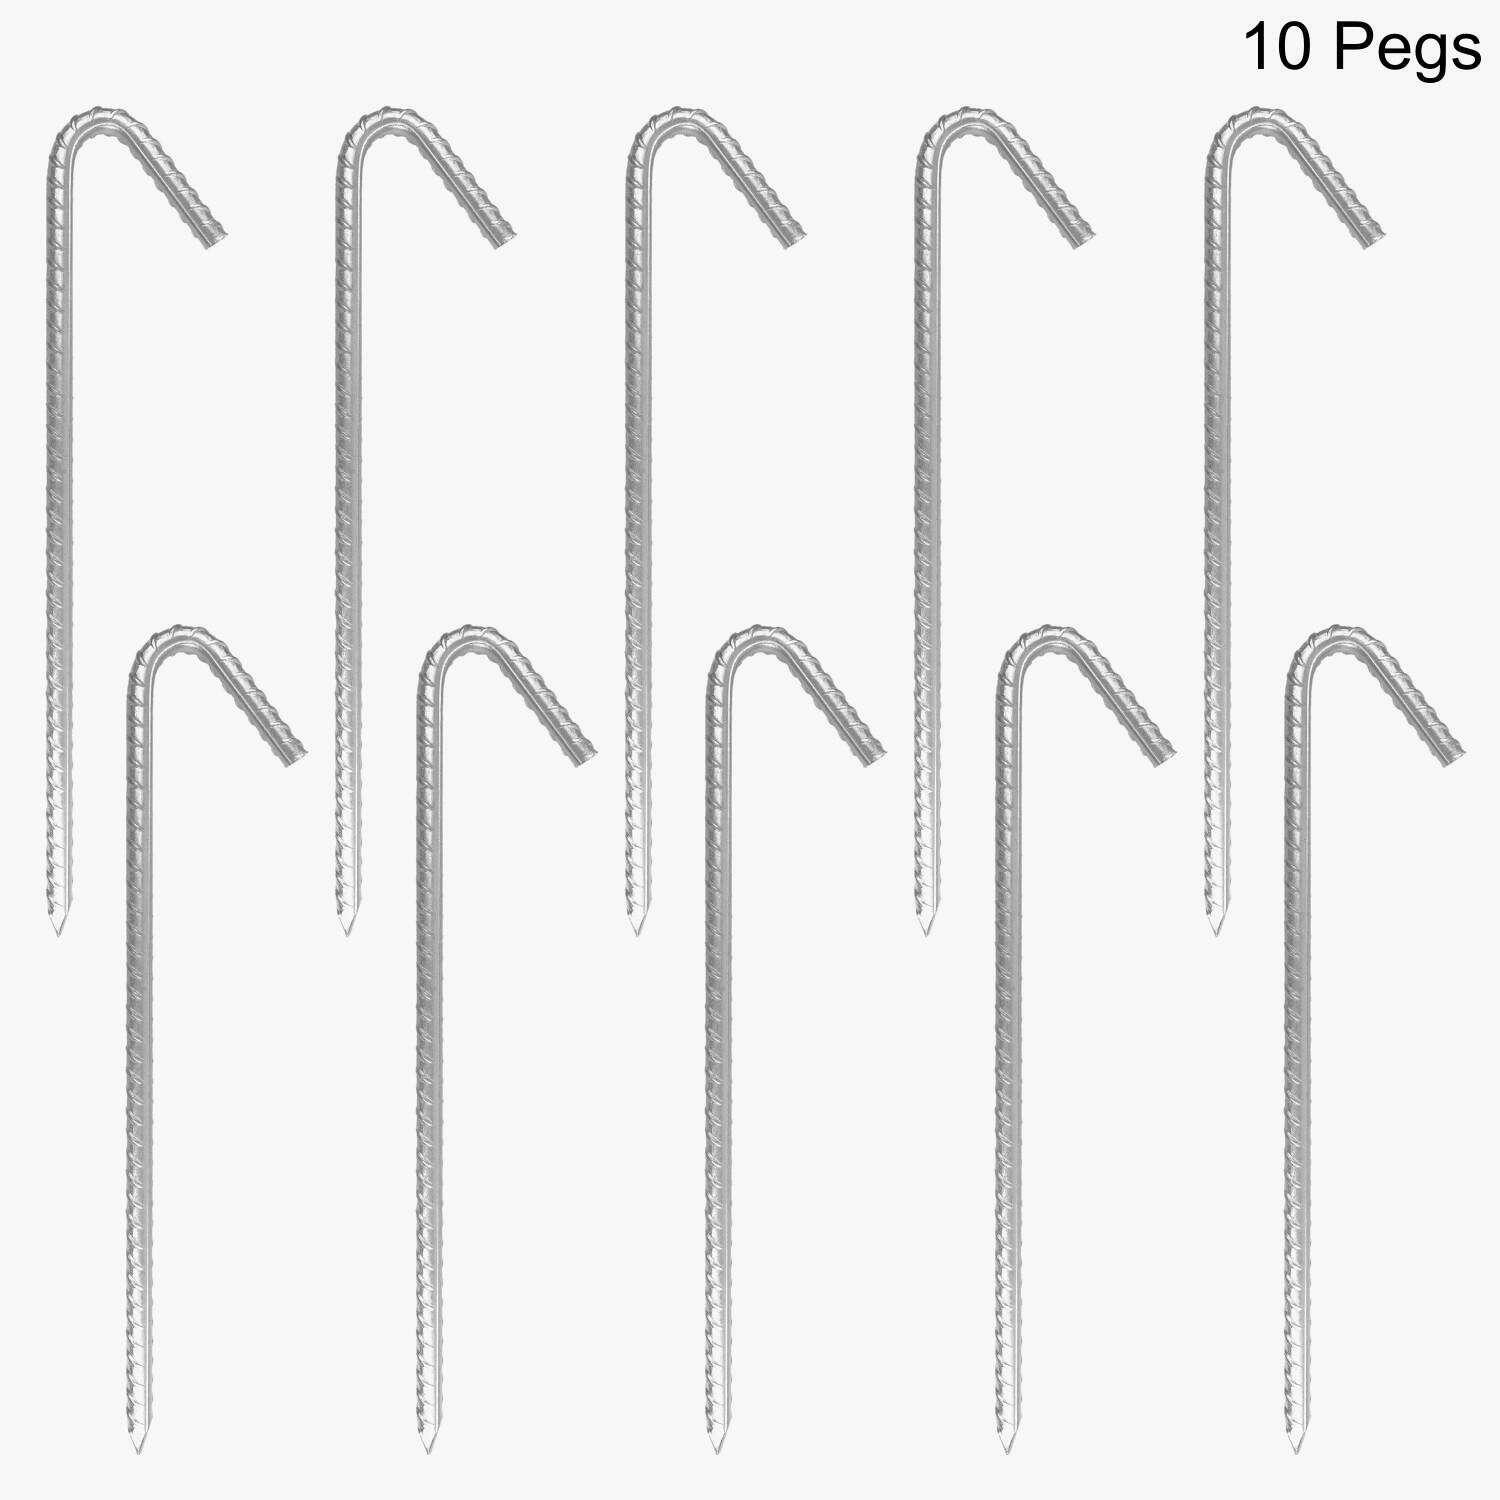 Lomo Marquee Heavy Duty Tent Pegs - Set of 10 3/4